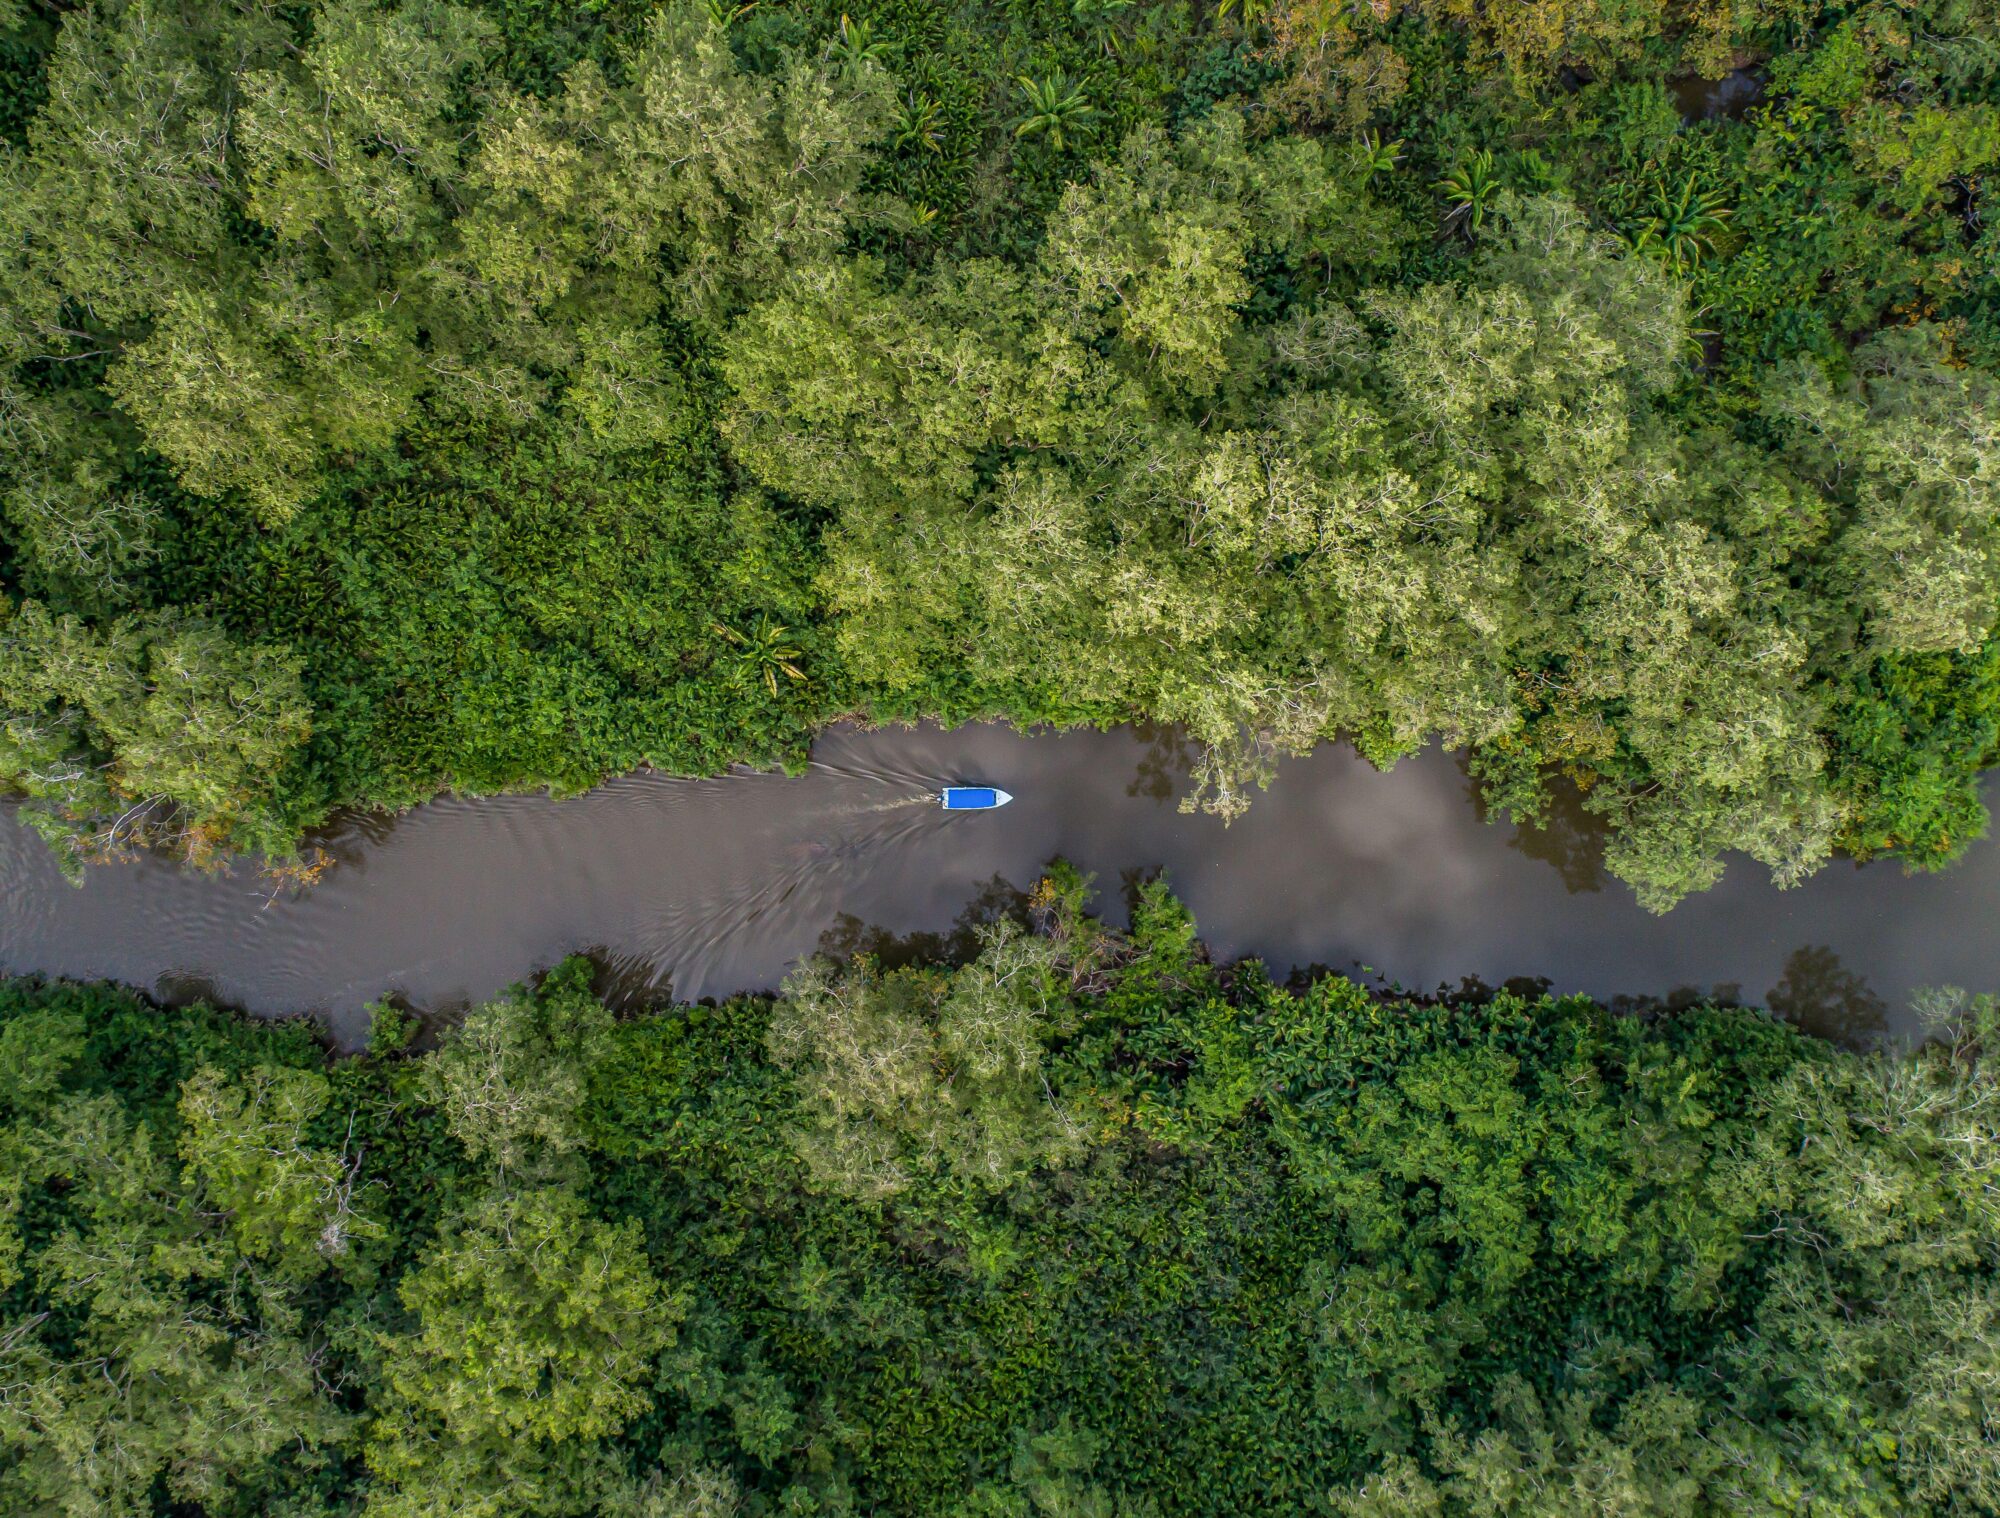 <p>A boat passes through a forest along Costa Rica&#8217;s Sierpe river. The Central American nation has won praise for its conservation efforts, including in reforestation, and continues to attract international finance to support its initiatives. (Image: Christoph Lischetzki / Alamy)</p>